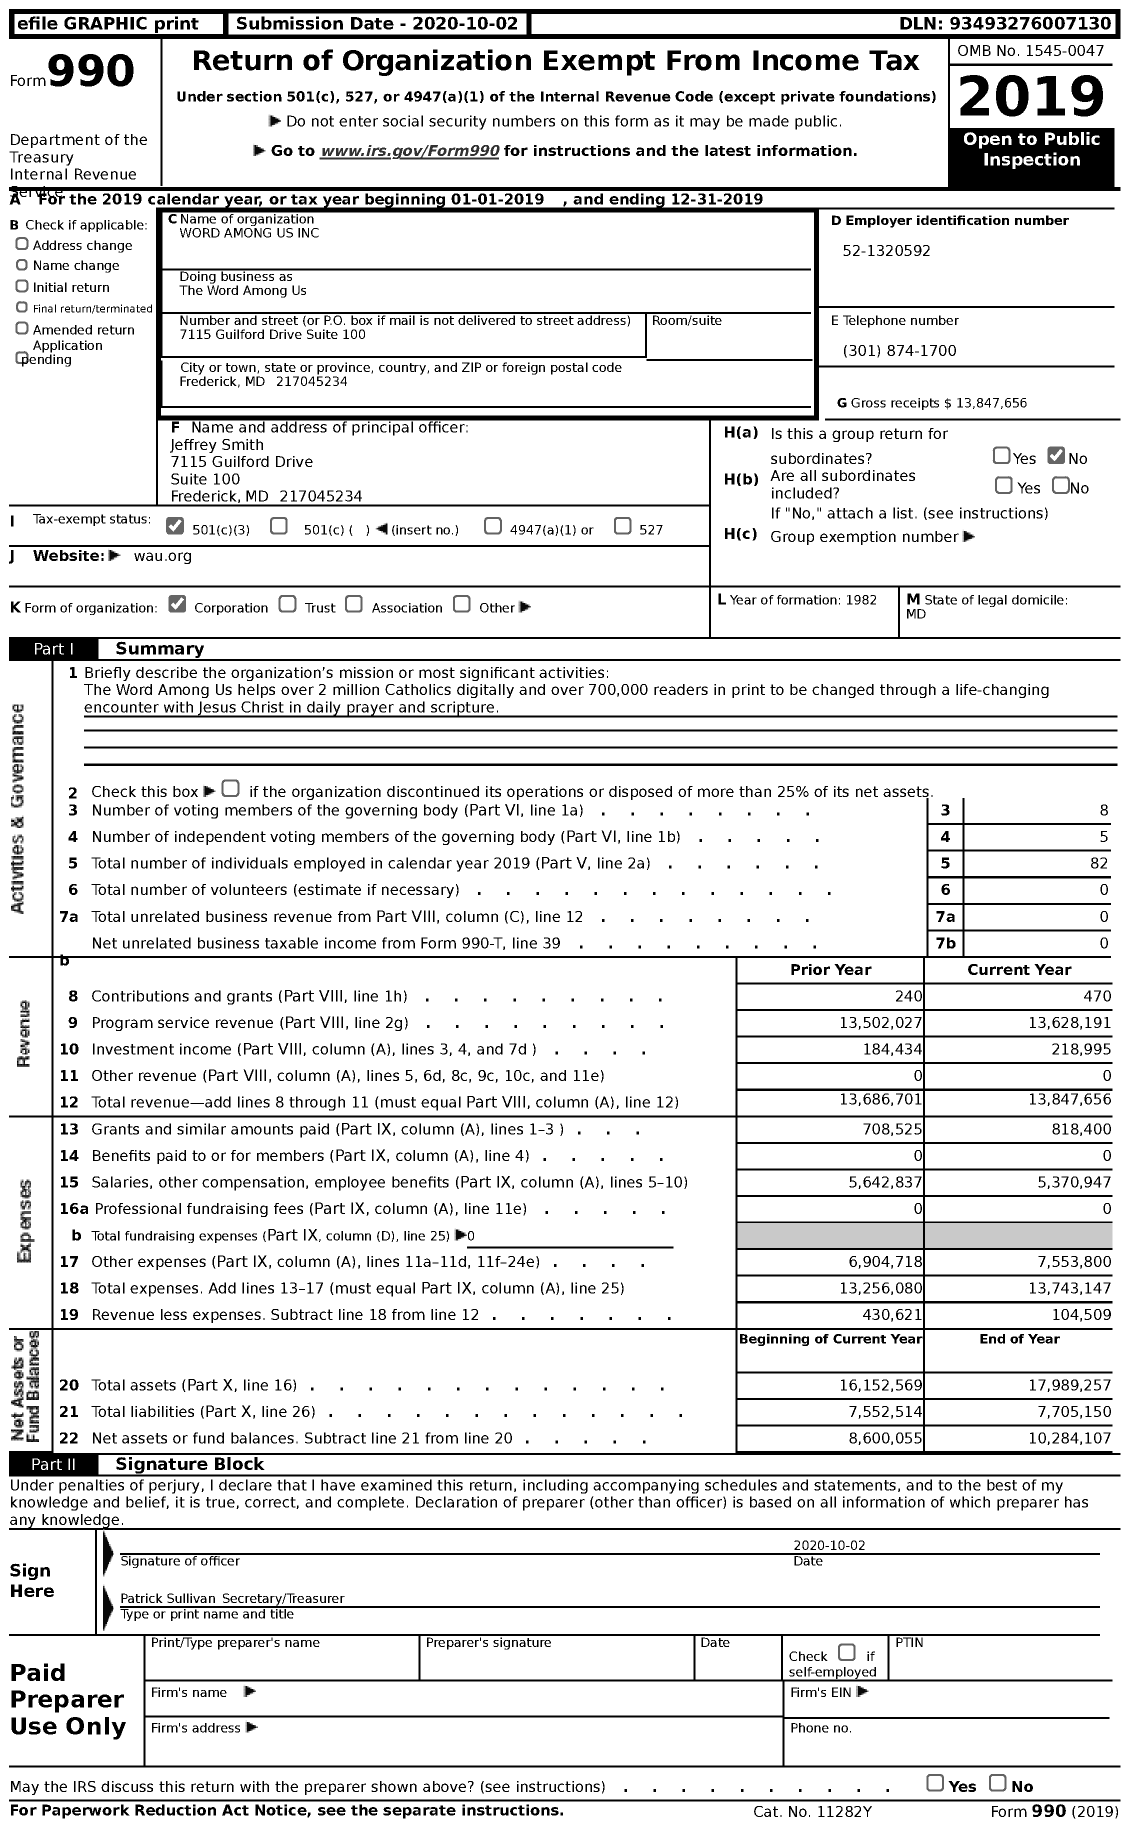 Image of first page of 2019 Form 990 for Word Among Us (WAU)